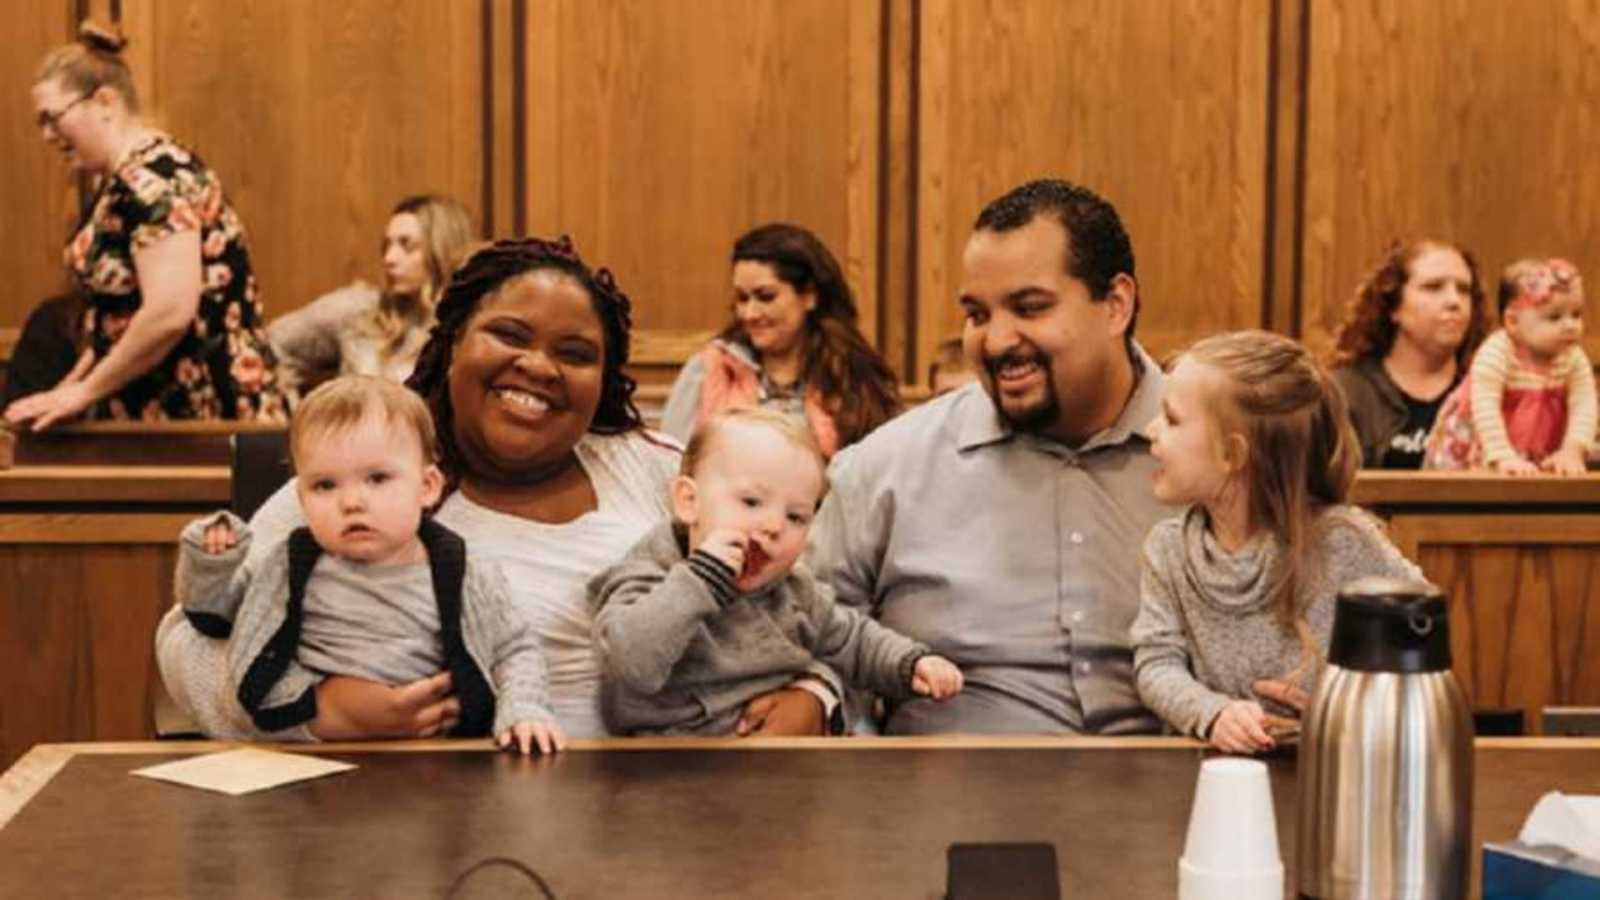 Adoptive family smiling together in courtroom